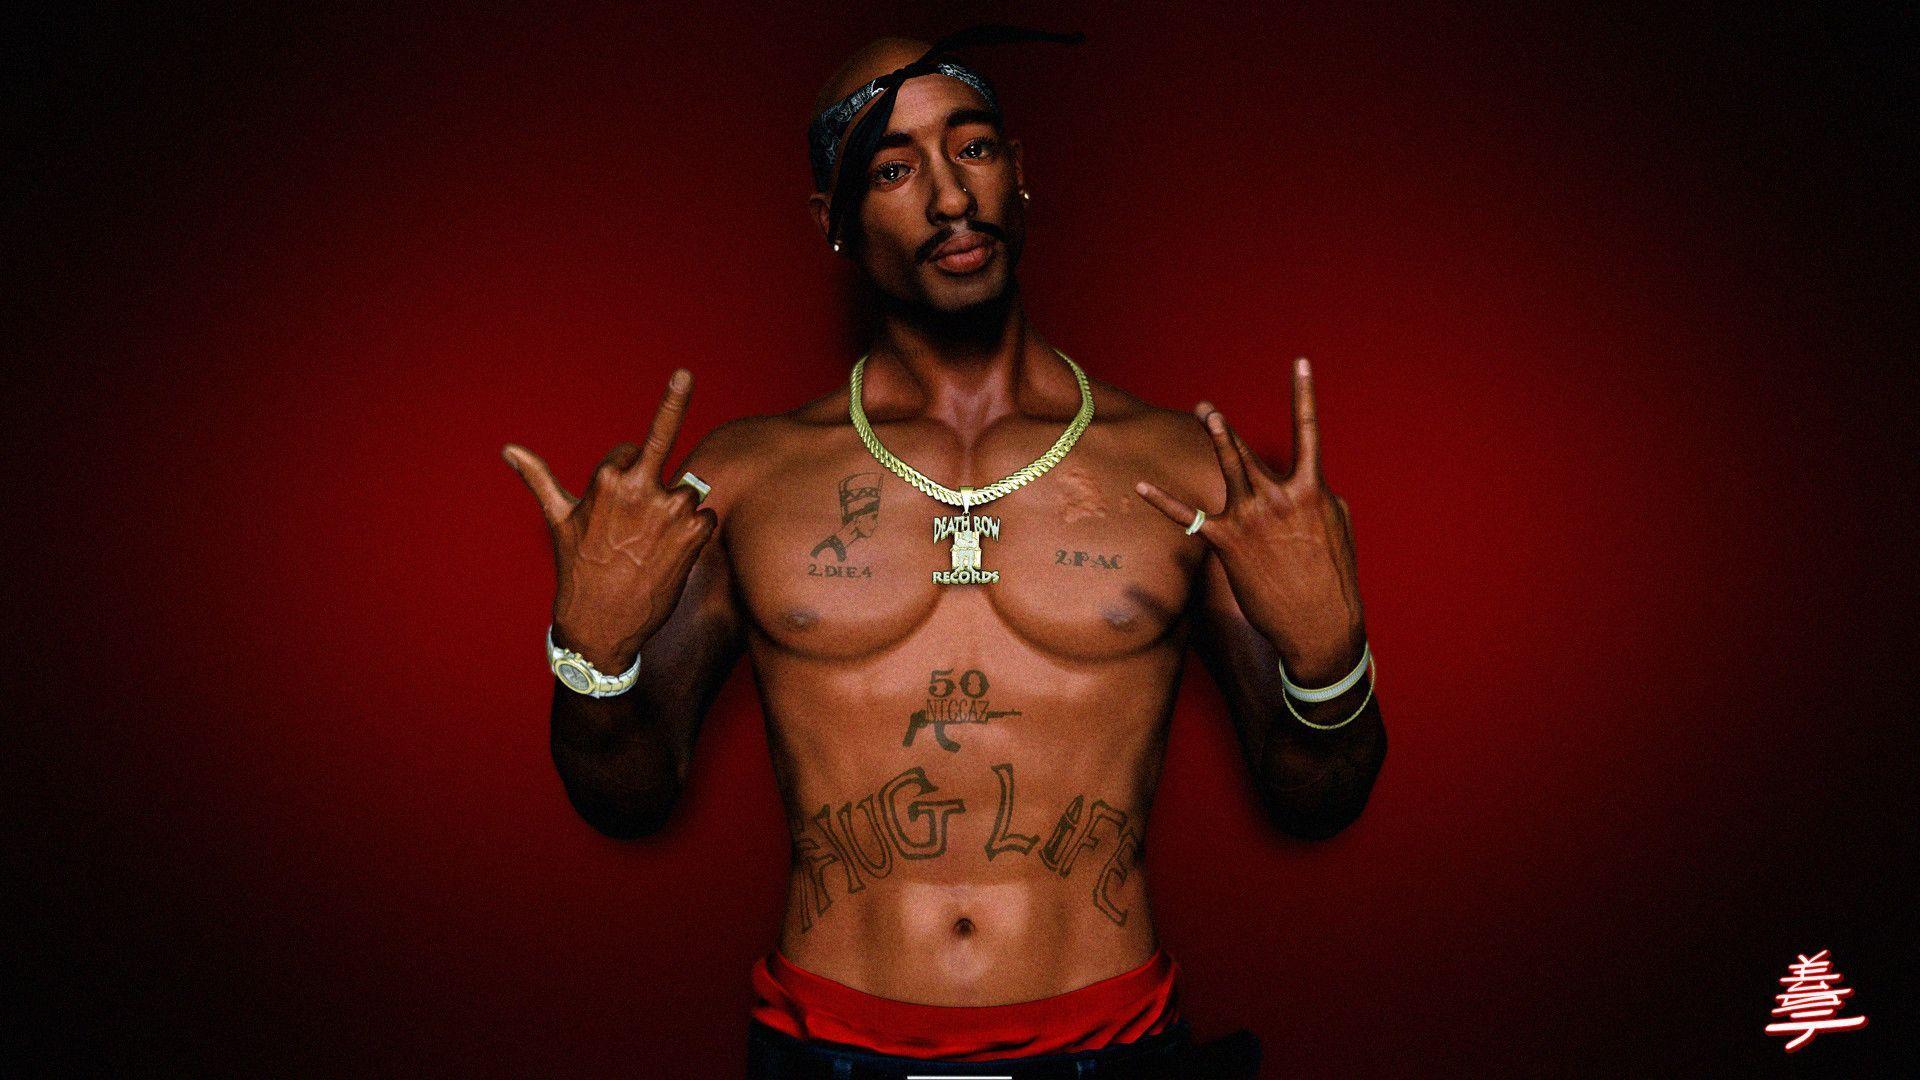 2pac Wallpaper Photo On High Resolution Wallpaper. Proyectos que